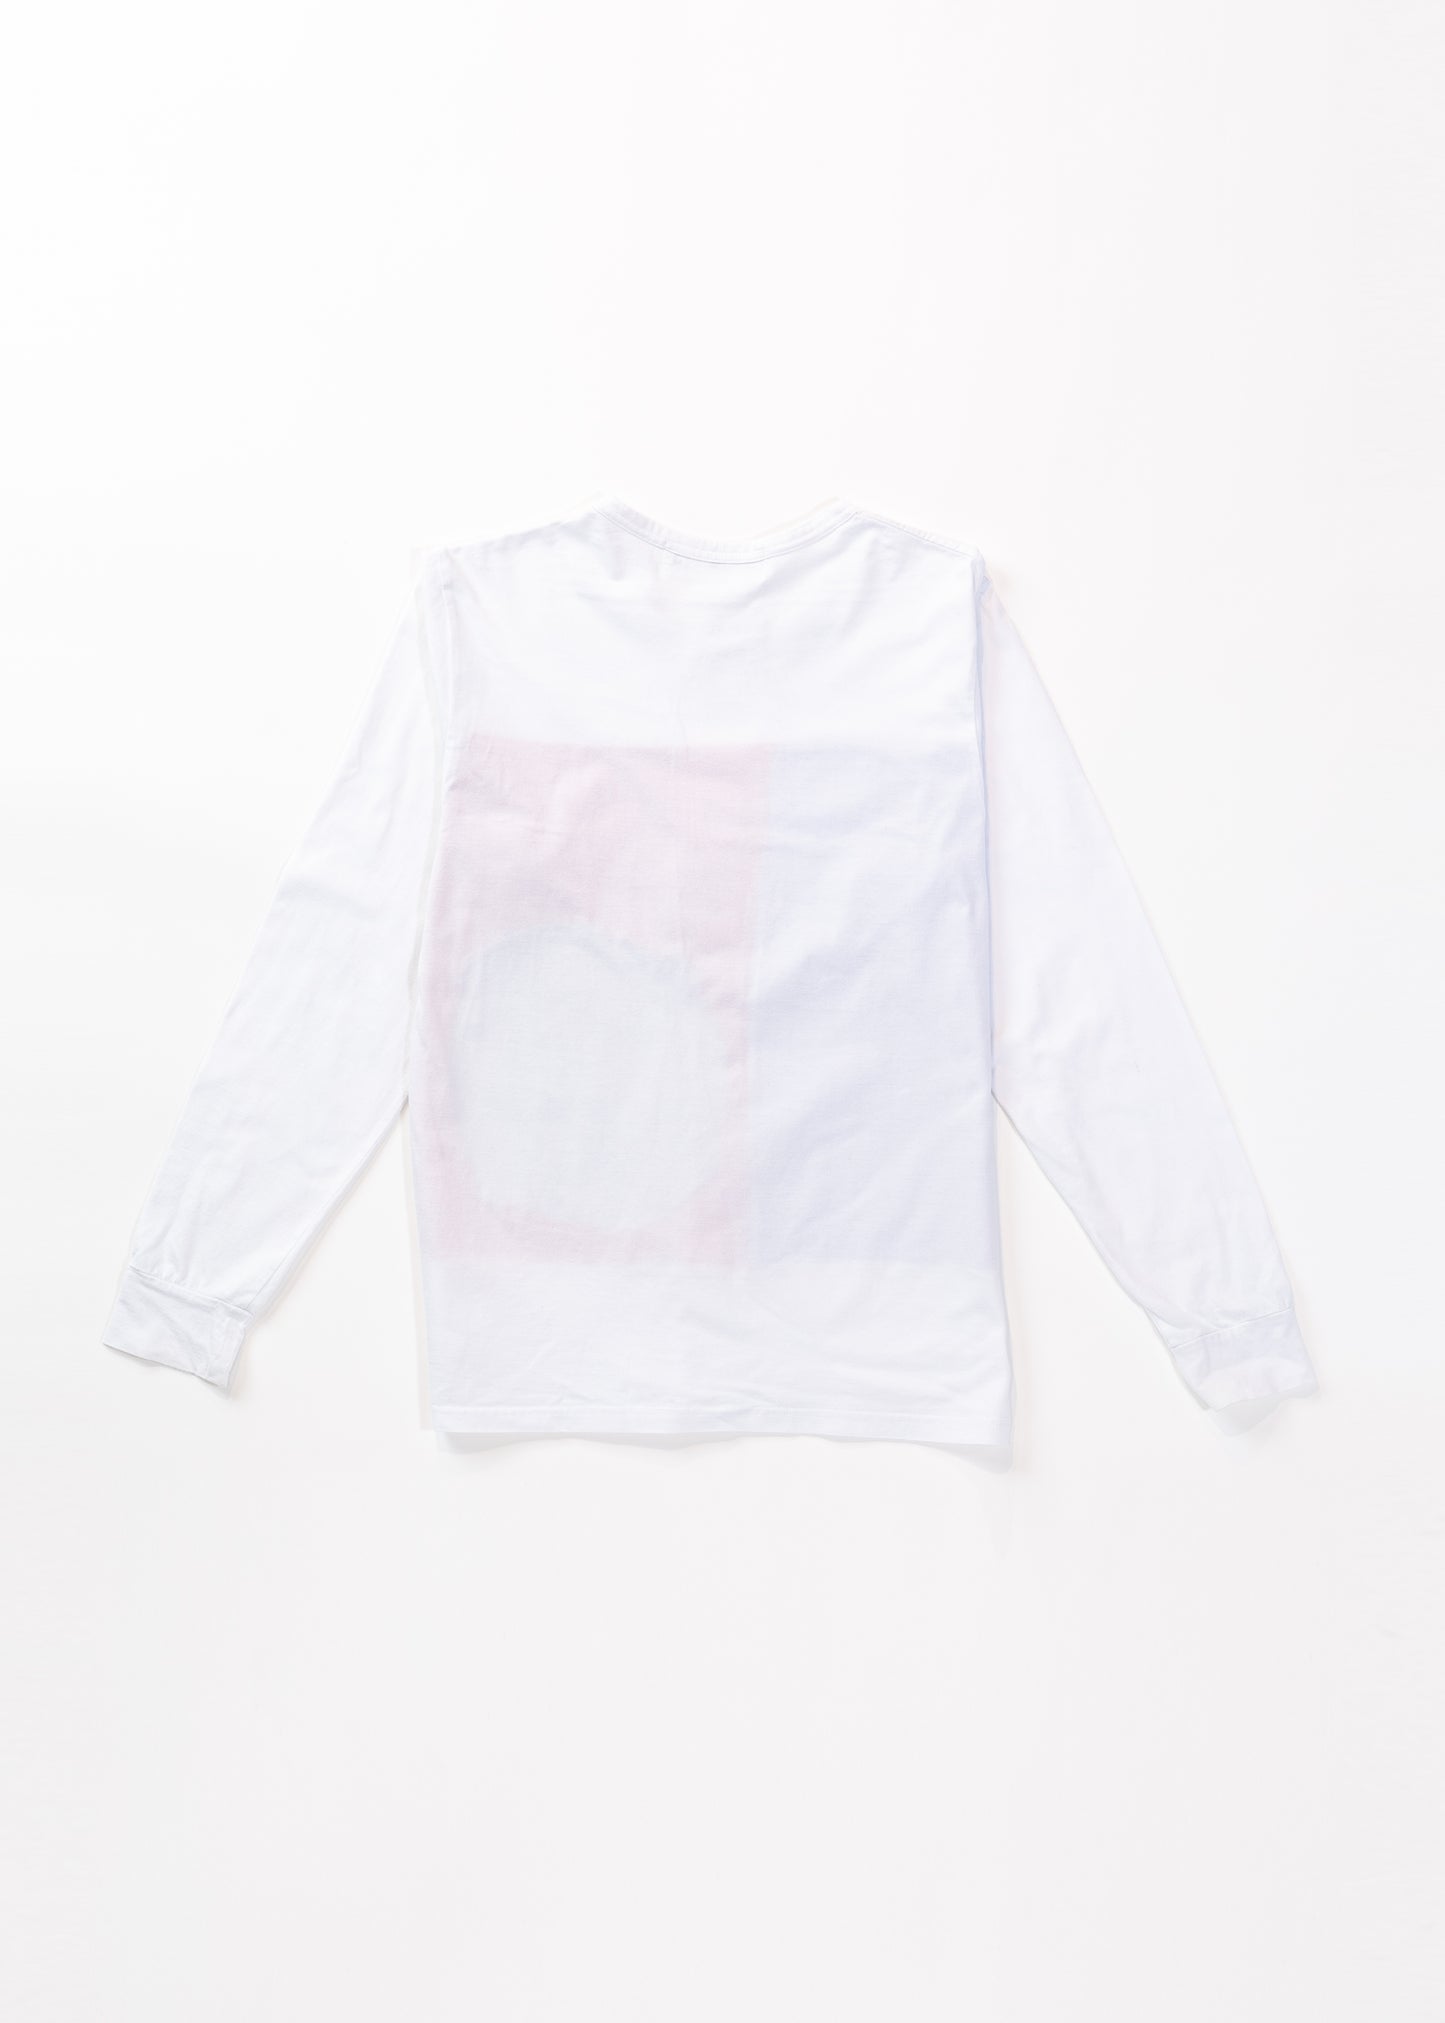 ALOYE / Switching different materials Tee